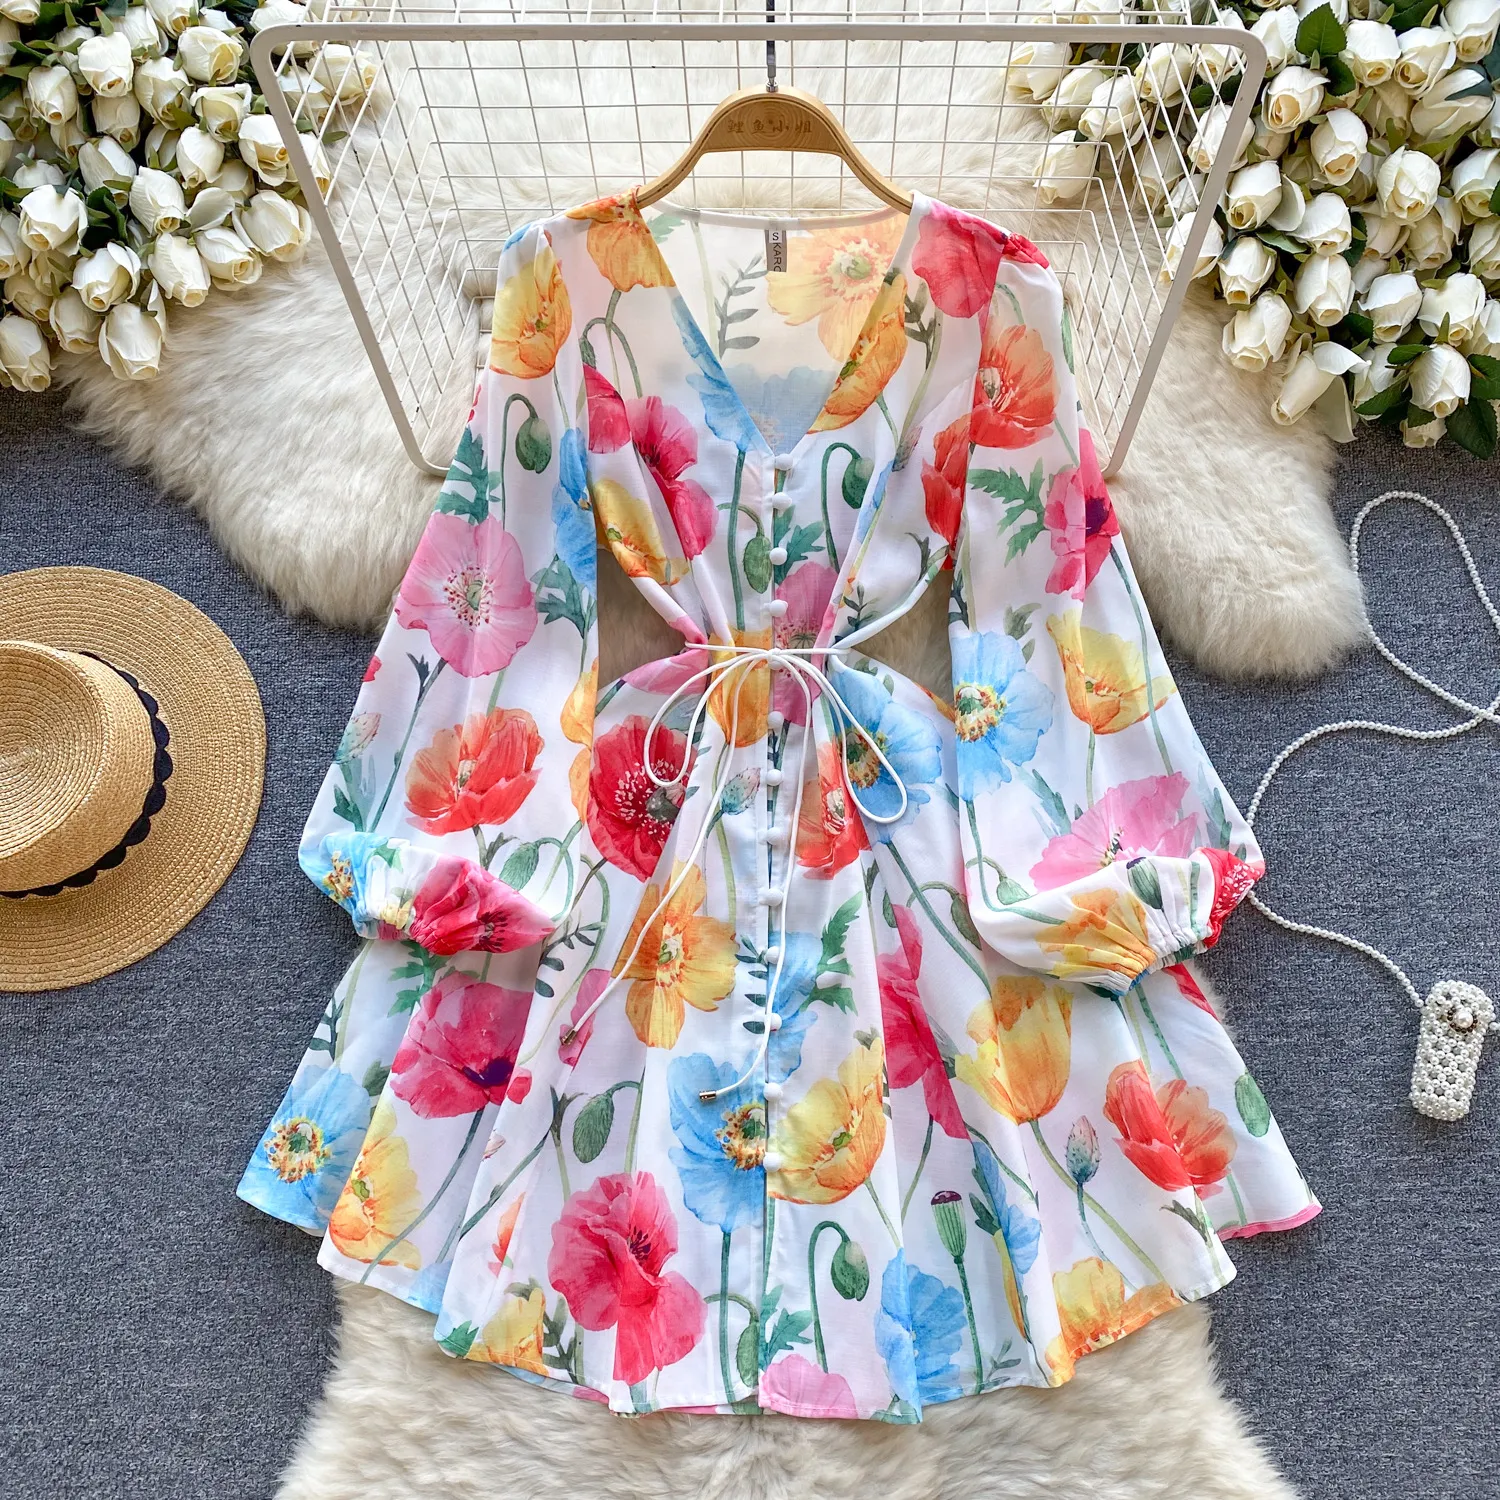 Fanhua Collection Vacation Style Elegant Dress Spring Dress Women's French Bubble Sleeves Slim Fit Short Elegant Small Dress